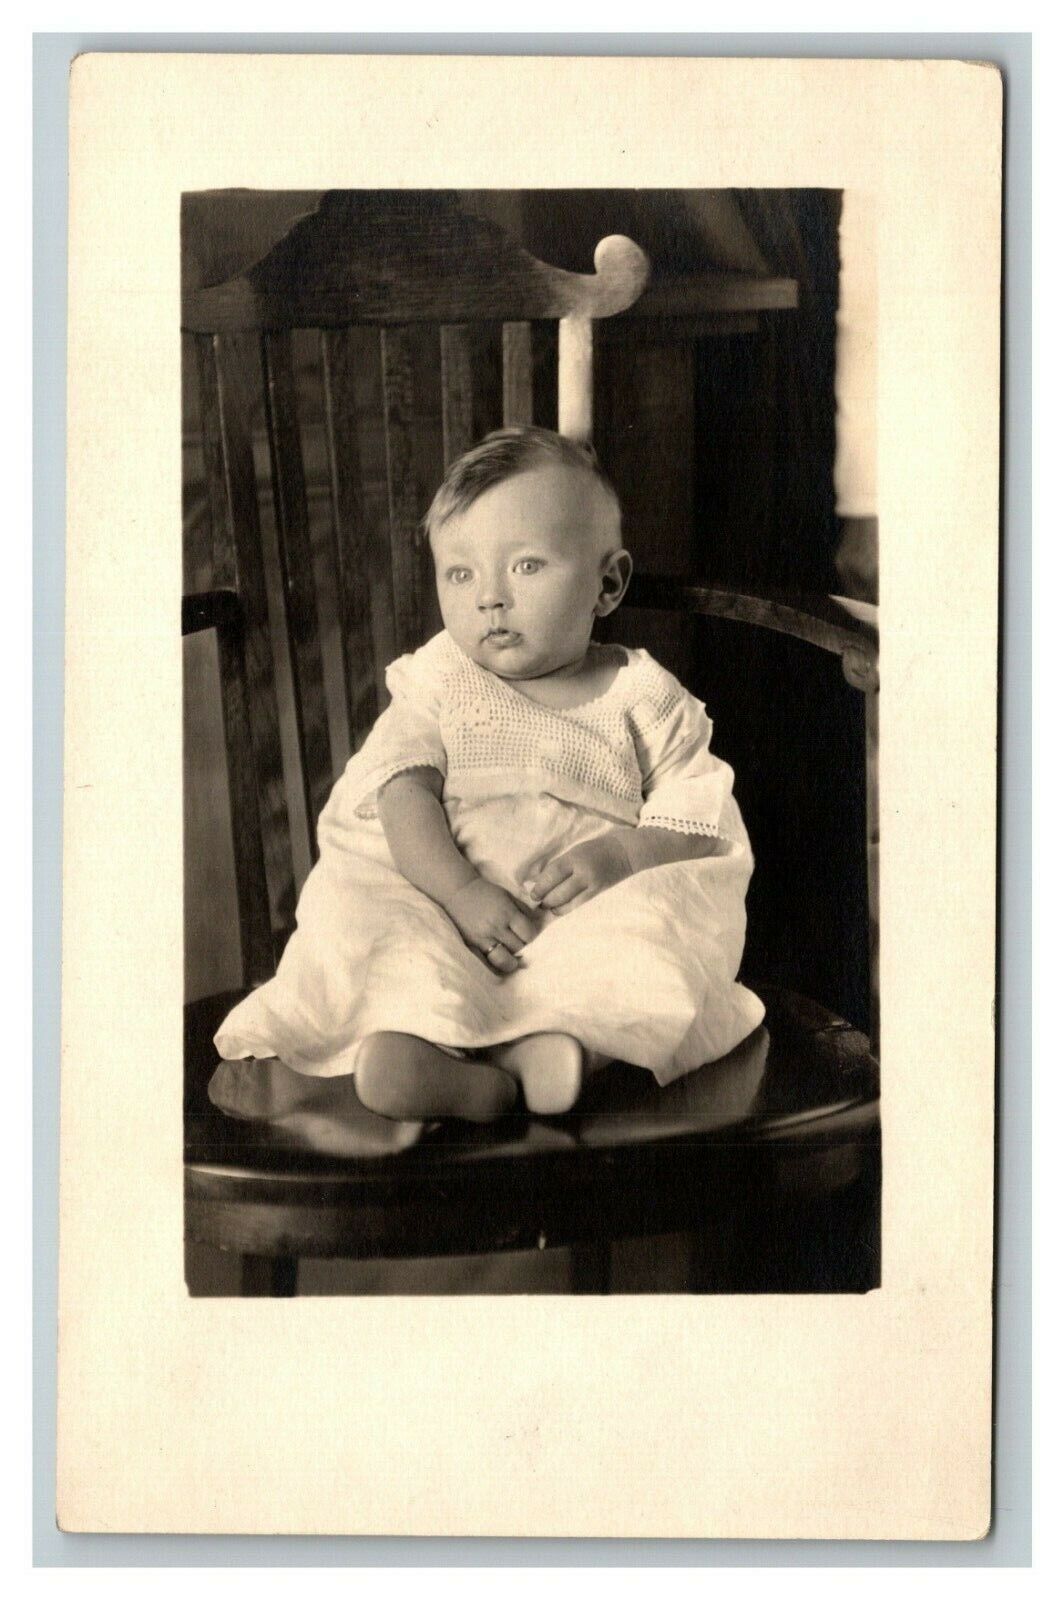 Vintage 1920's RPPC Postcard - Adorable Child on a Wooden Chair